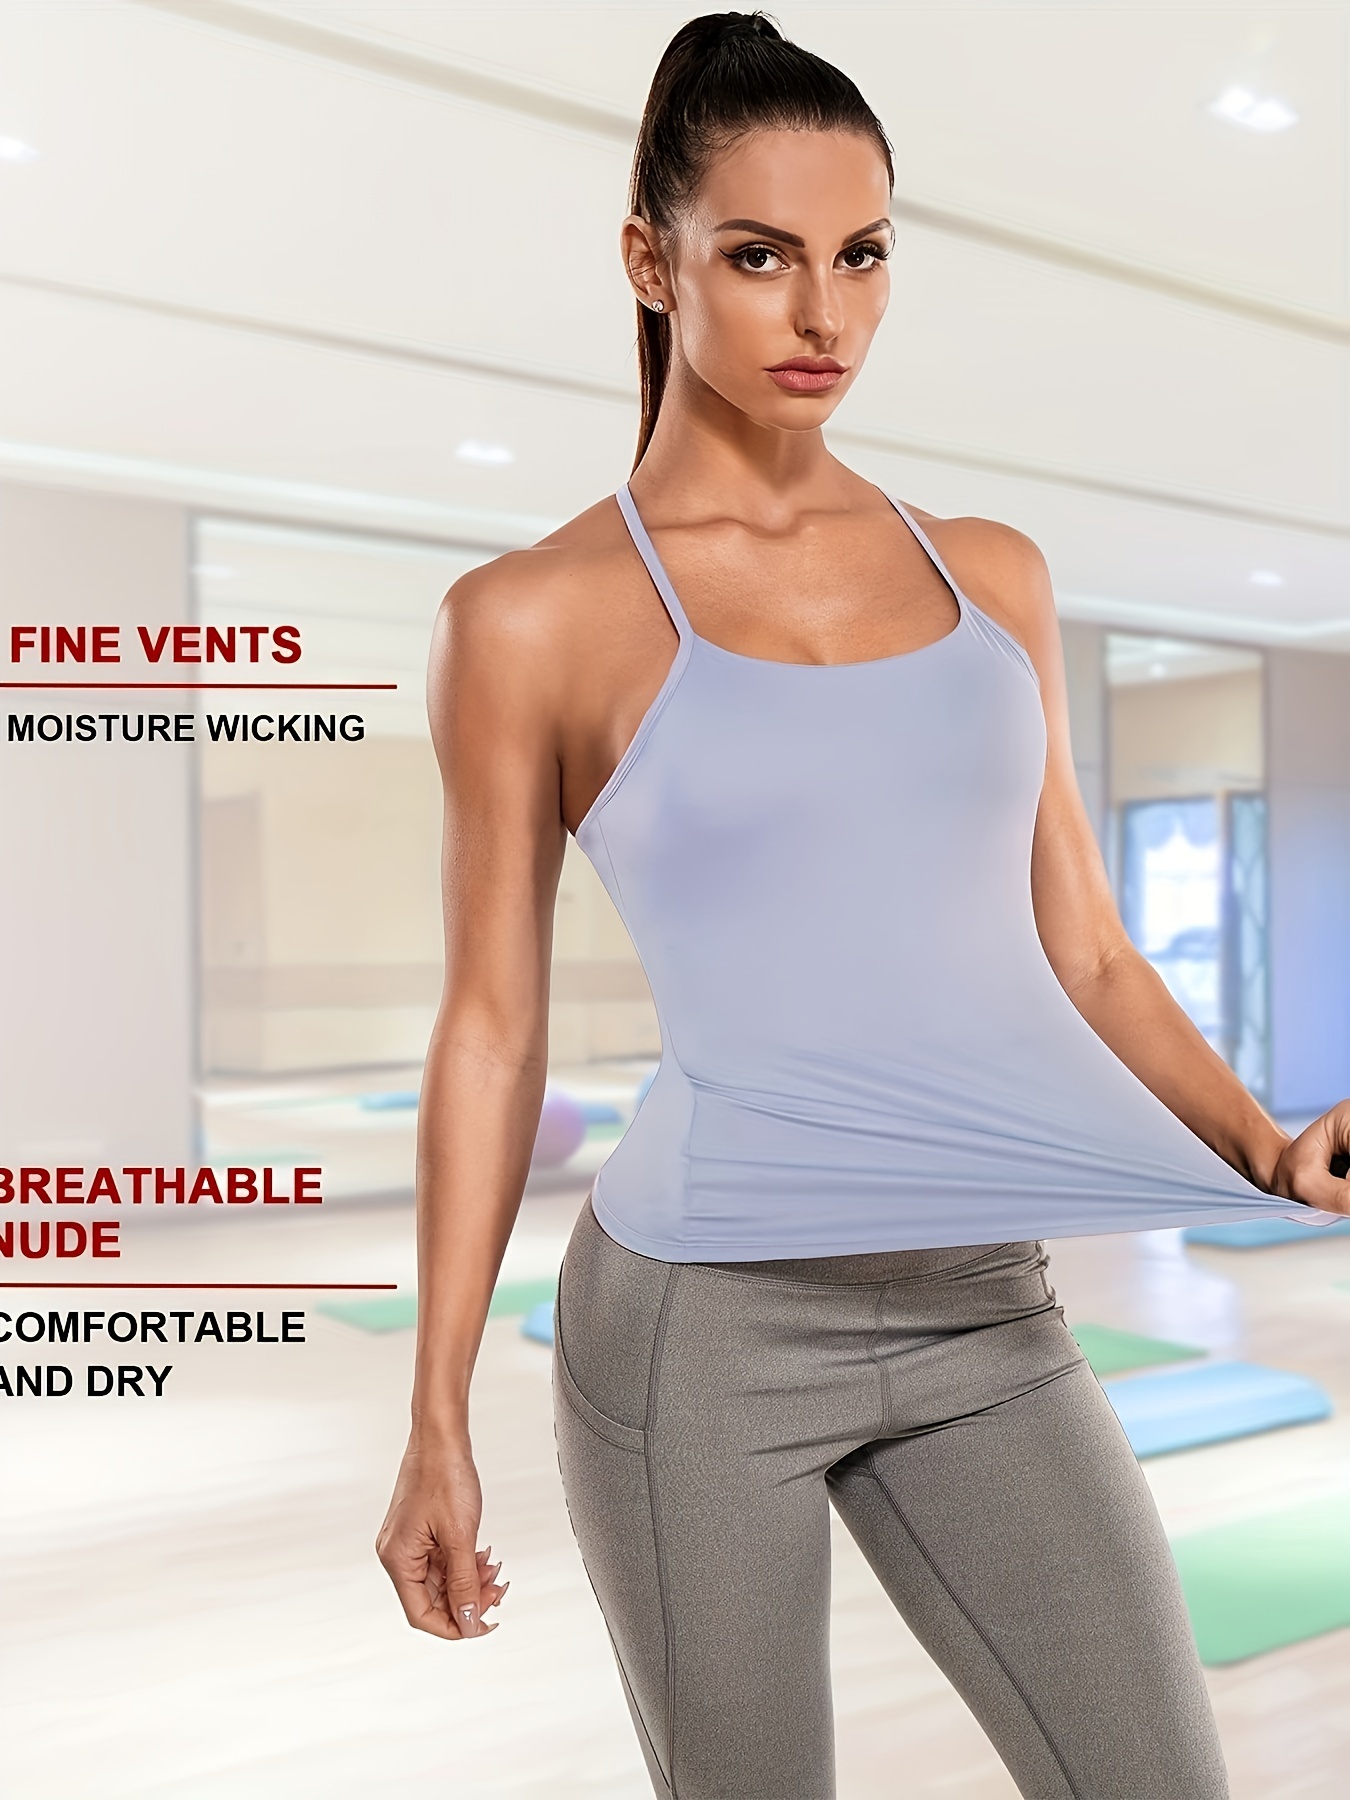 Workout Tank Tops For Women, Built In Bra Cami Top Yoga Shirts